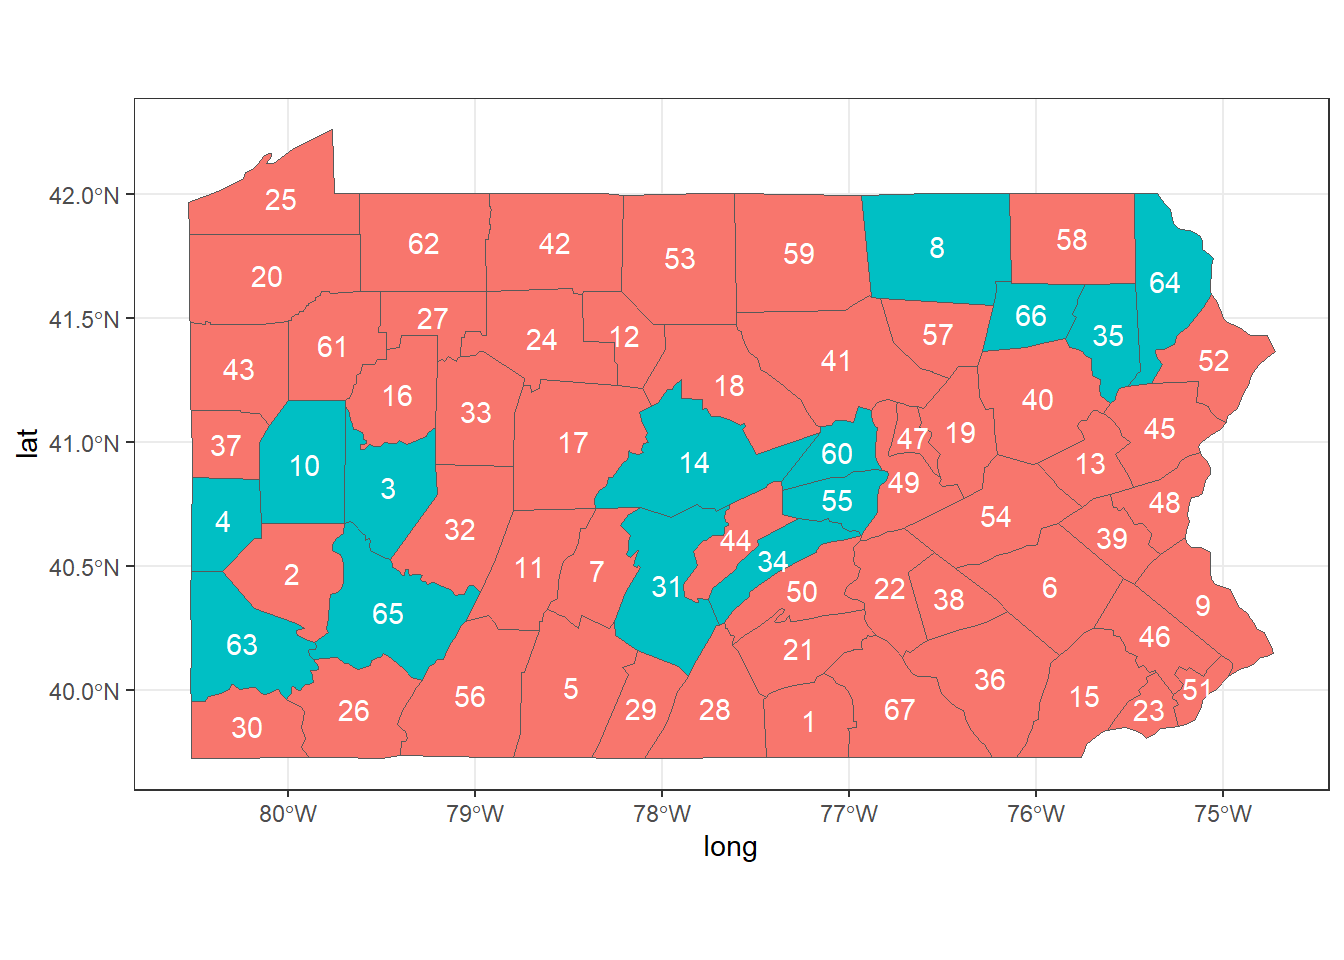 Neighbors of areas 2, 44 and 58 of Pennsylvania.